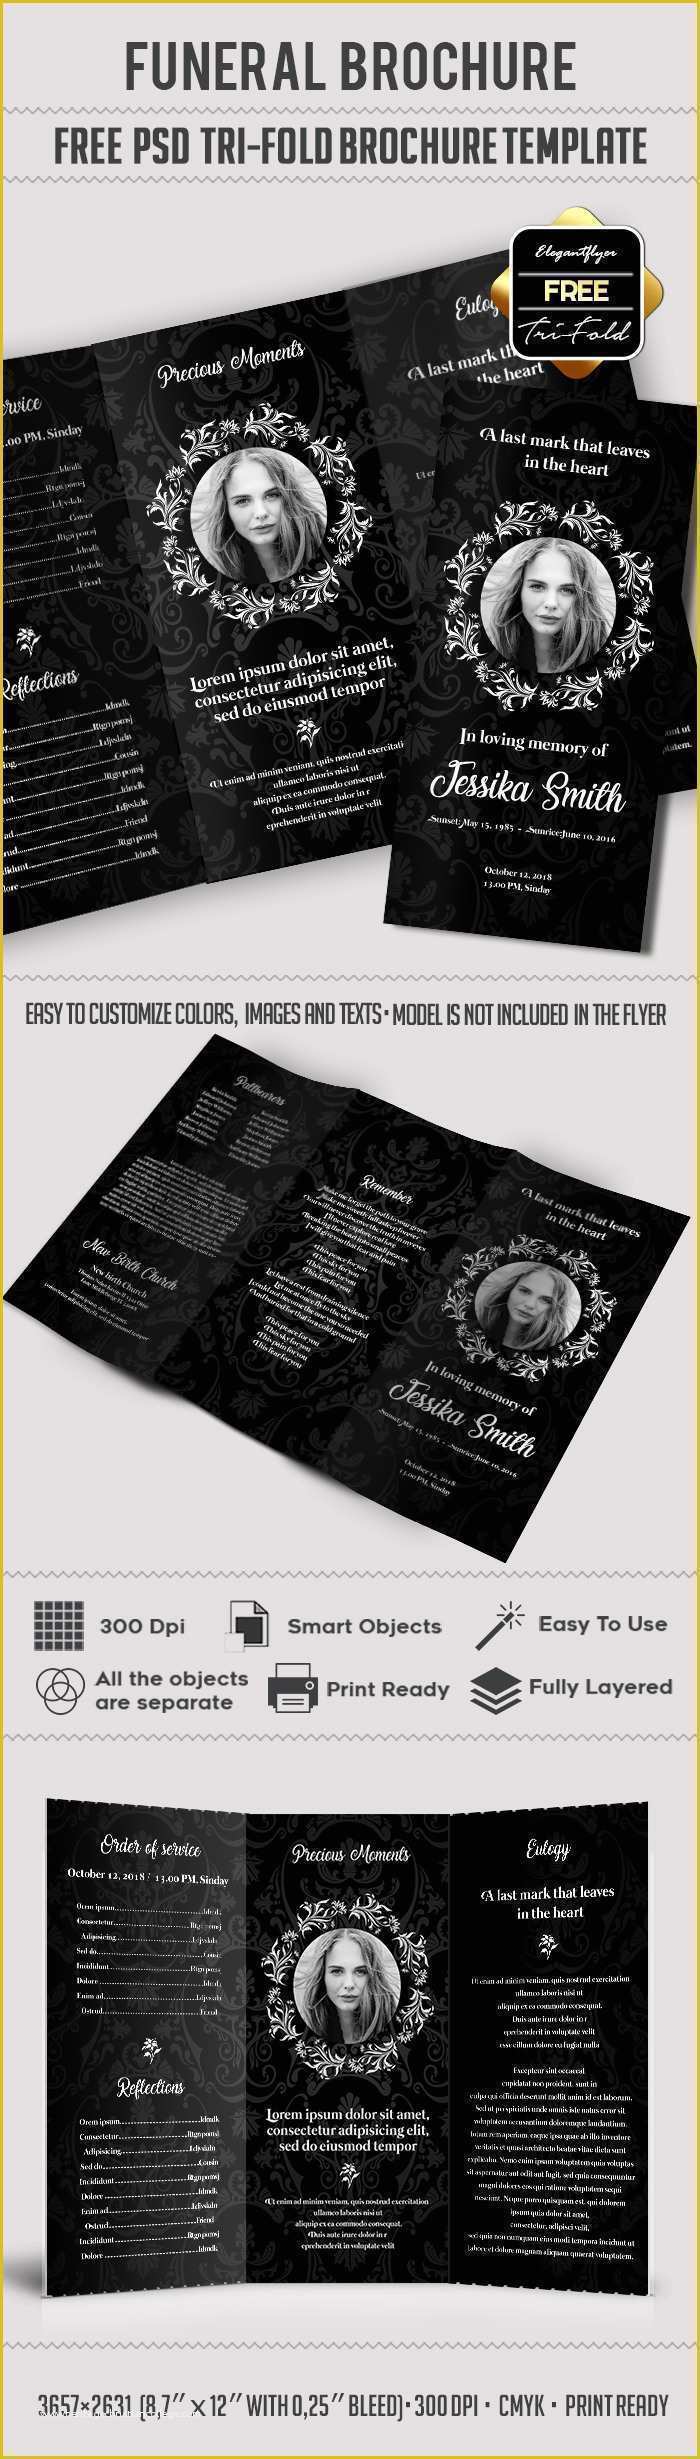 Free Funeral Flyer Template Psd Of Free Funeral Trifold Brochure – by Elegantflyer